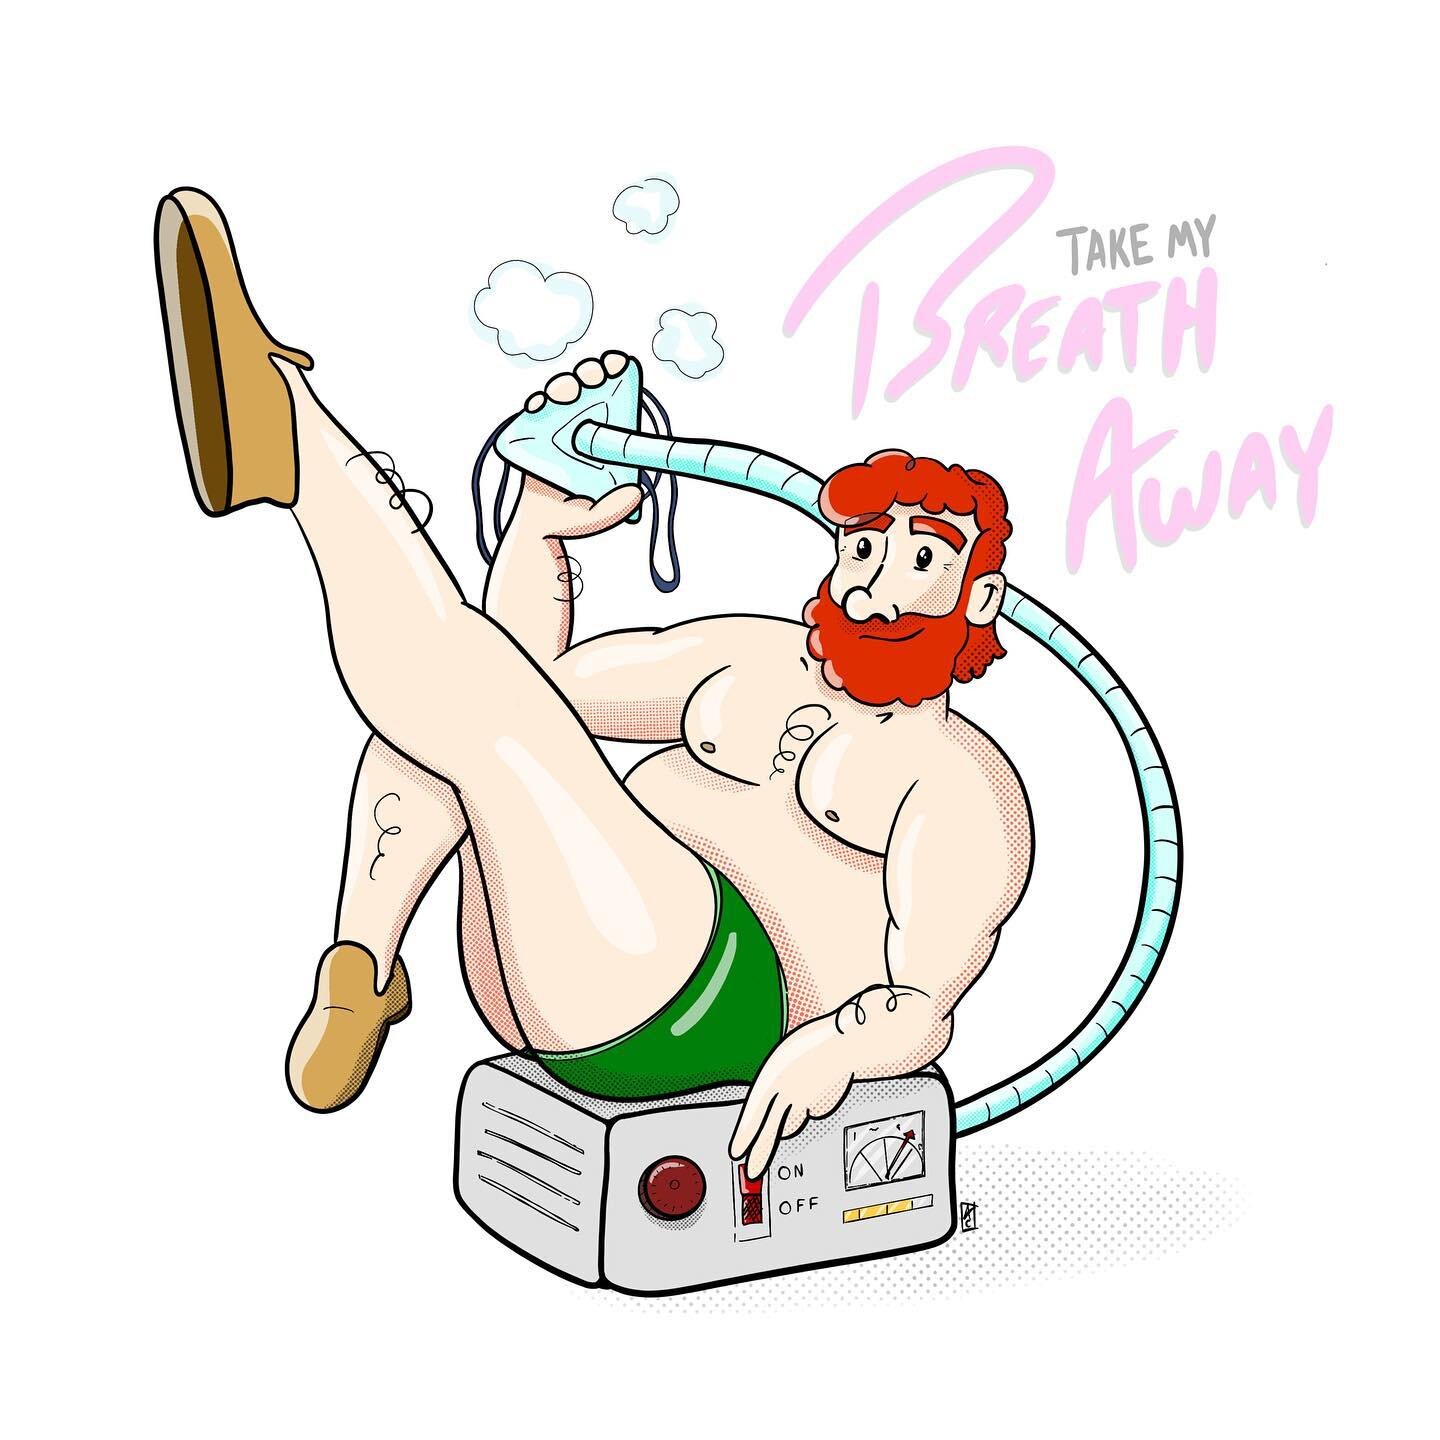 CPAP&hellip;but make it sexy. 
.
#instagay #gaybears #gayillustrations #cpapmachine